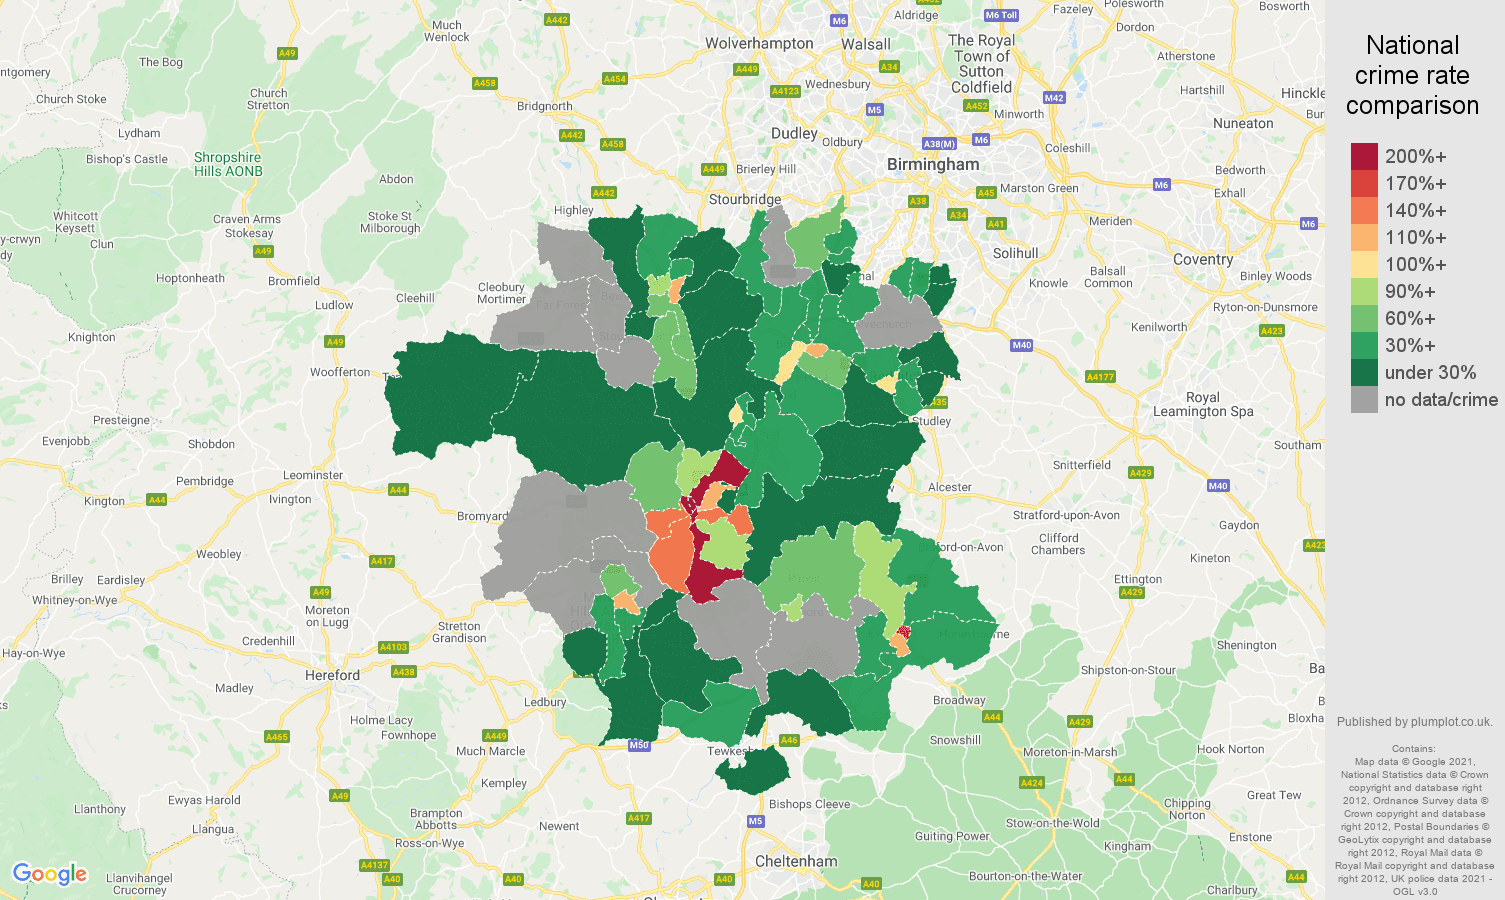 Worcestershire bicycle theft crime rate comparison map